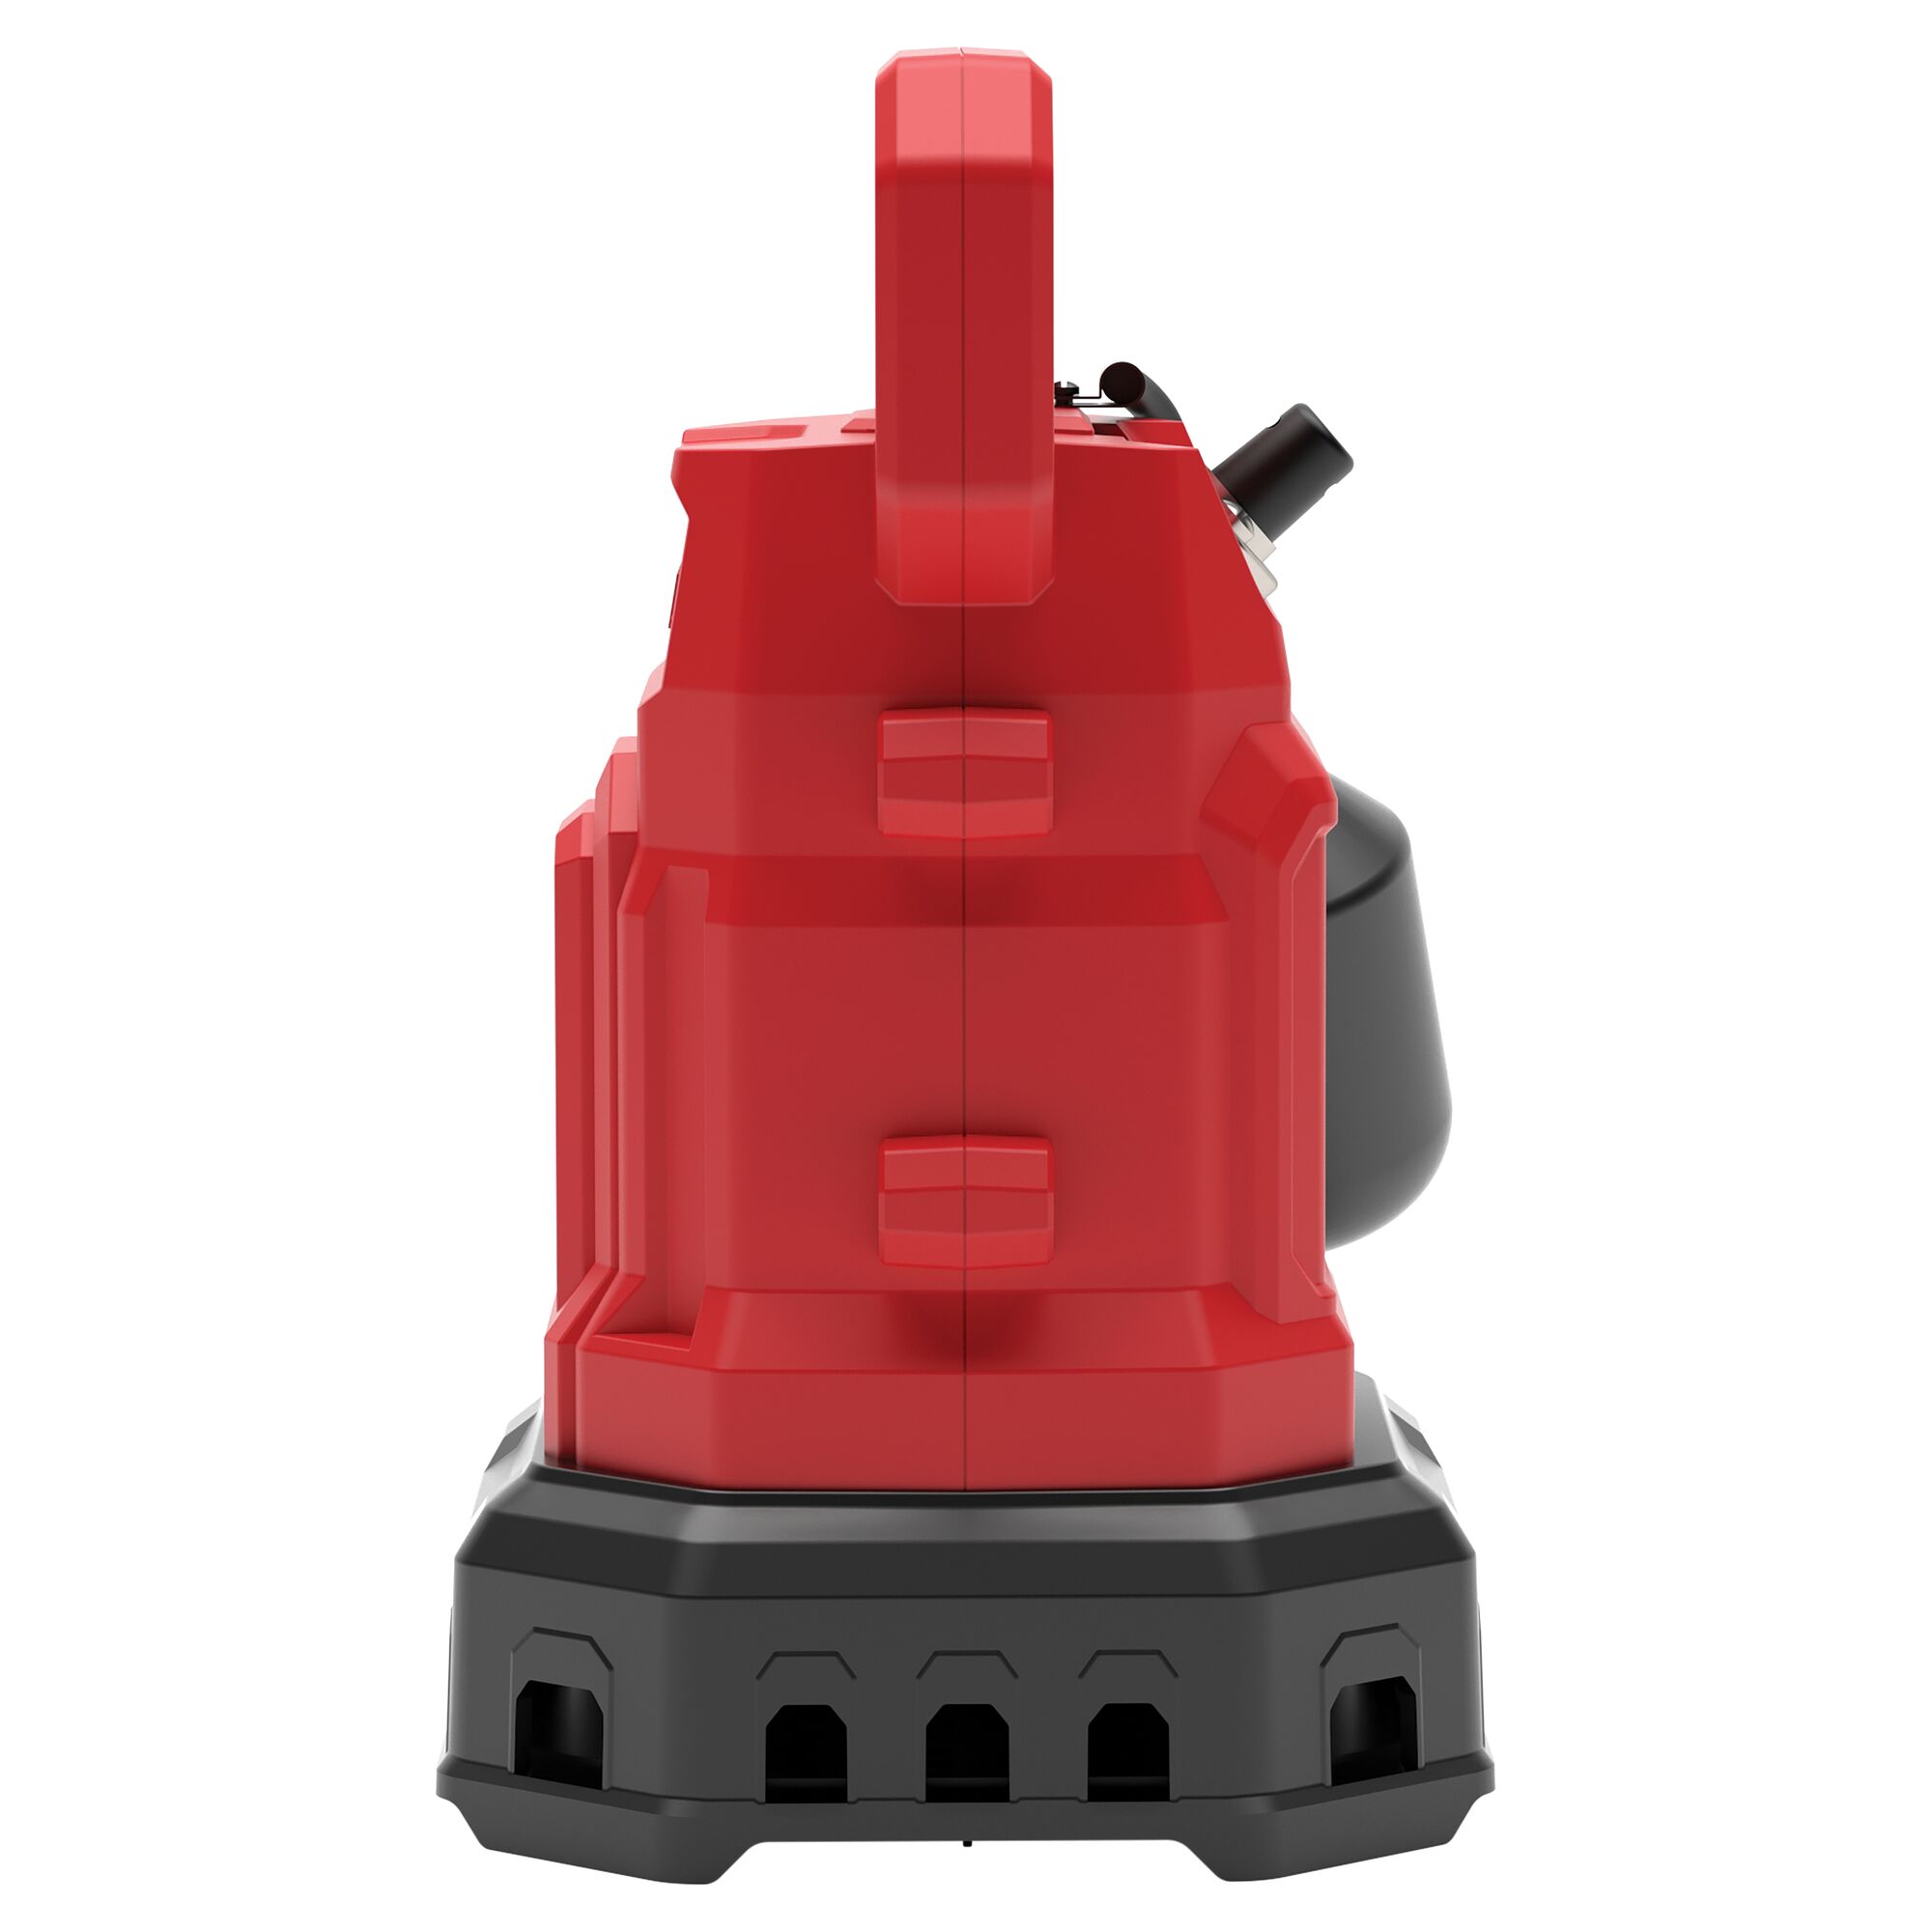 1-3HP SUMP PUMP REINFORCED THERMOPLASTIC SUBMERSIBLE AUTOMATIC TETHERED SWITCH FRONT VIEW